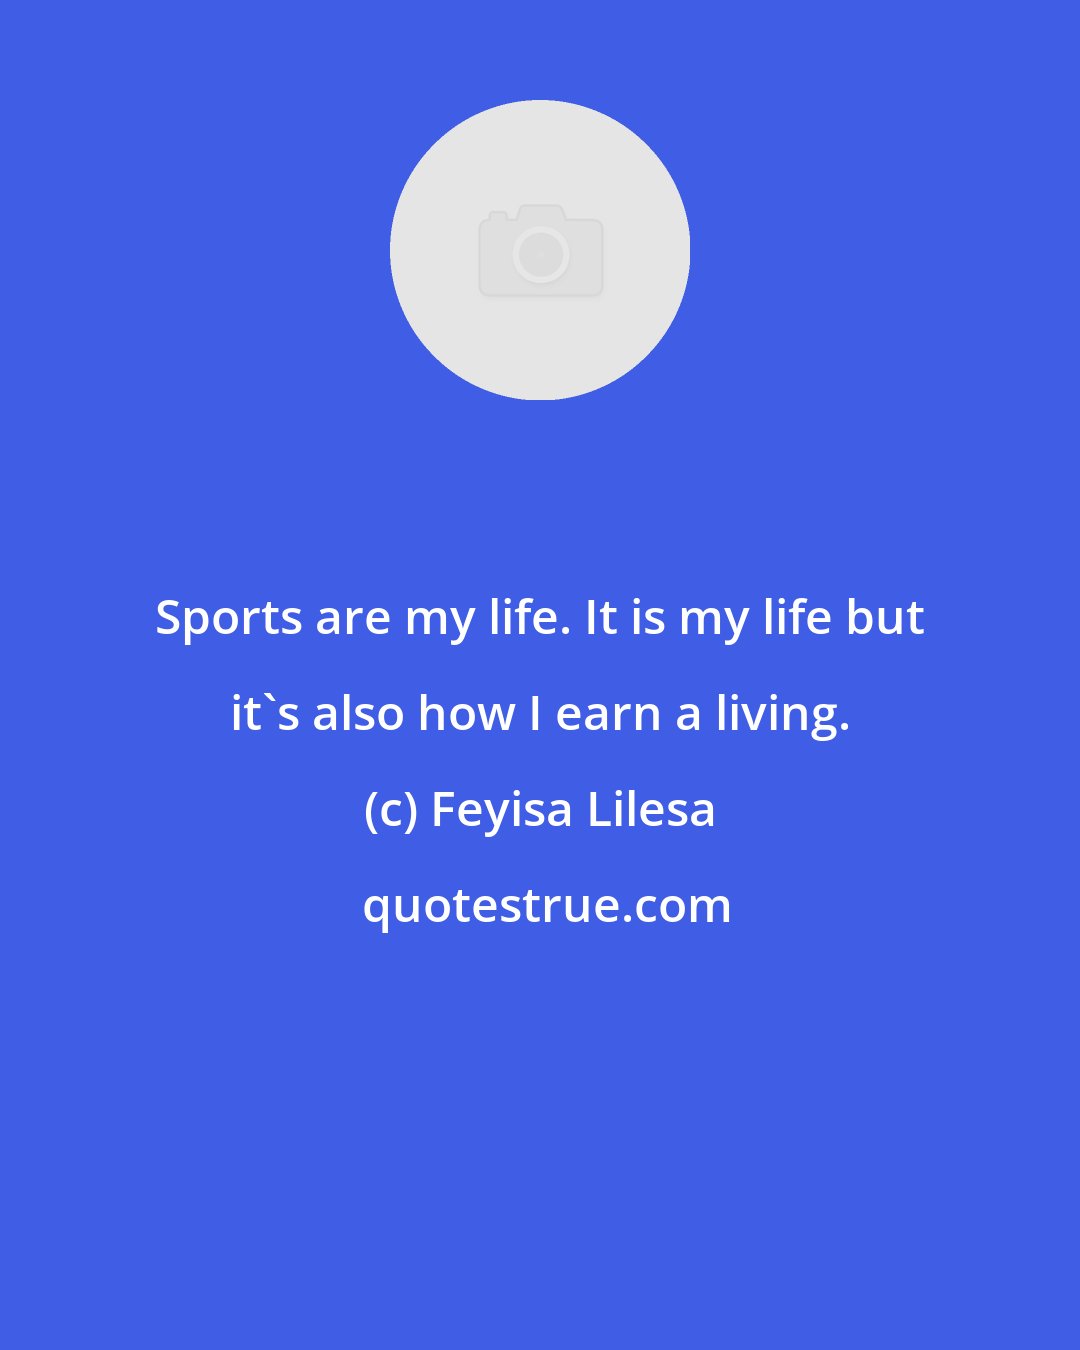 Feyisa Lilesa: Sports are my life. It is my life but it's also how I earn a living.